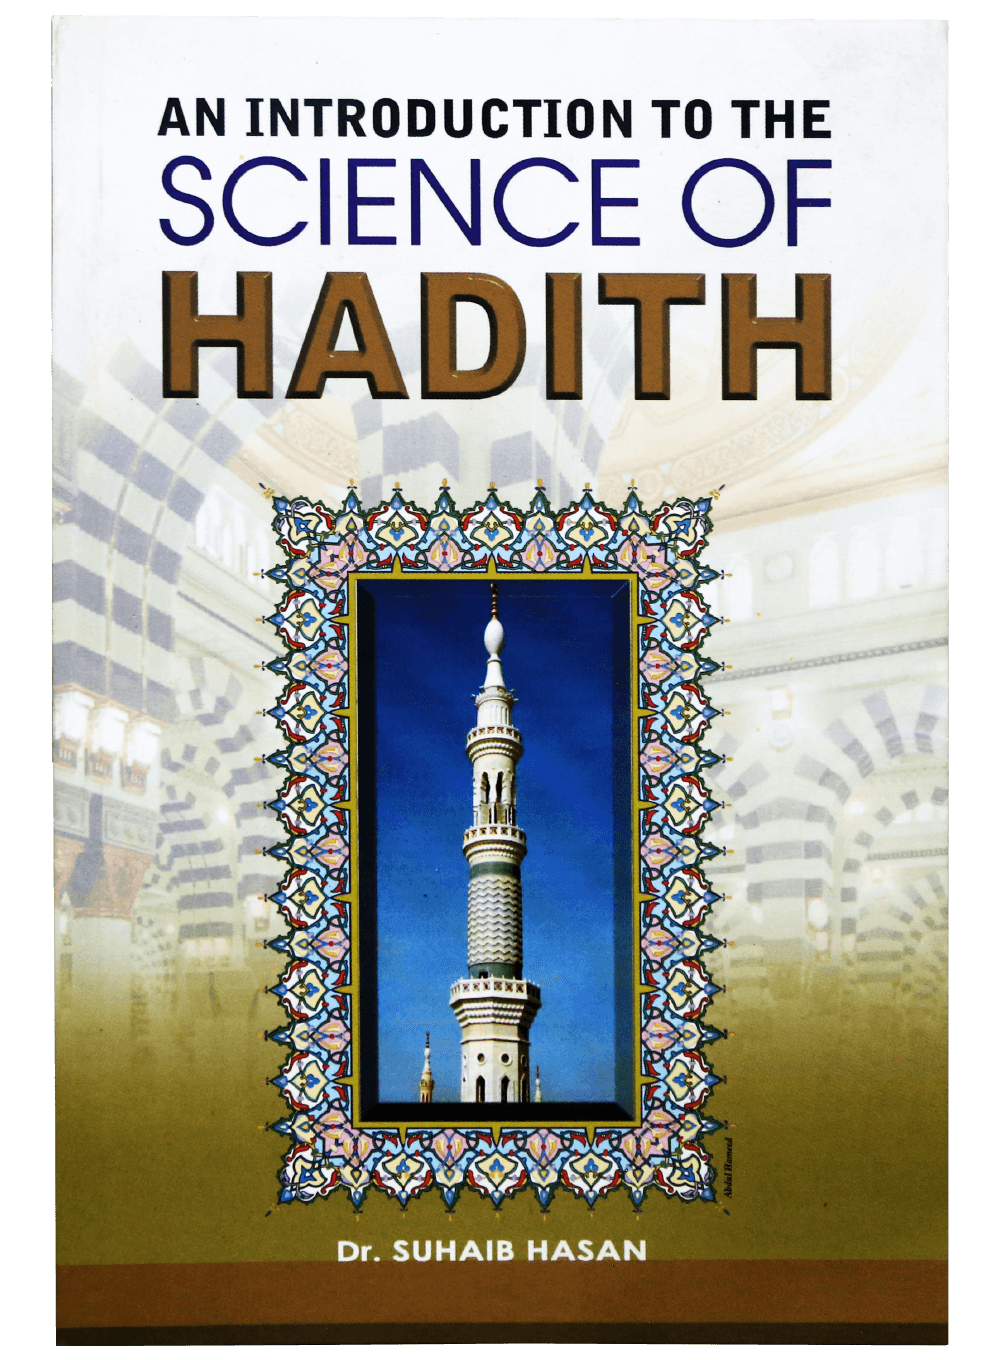 An Introduction of the Science of Hadith